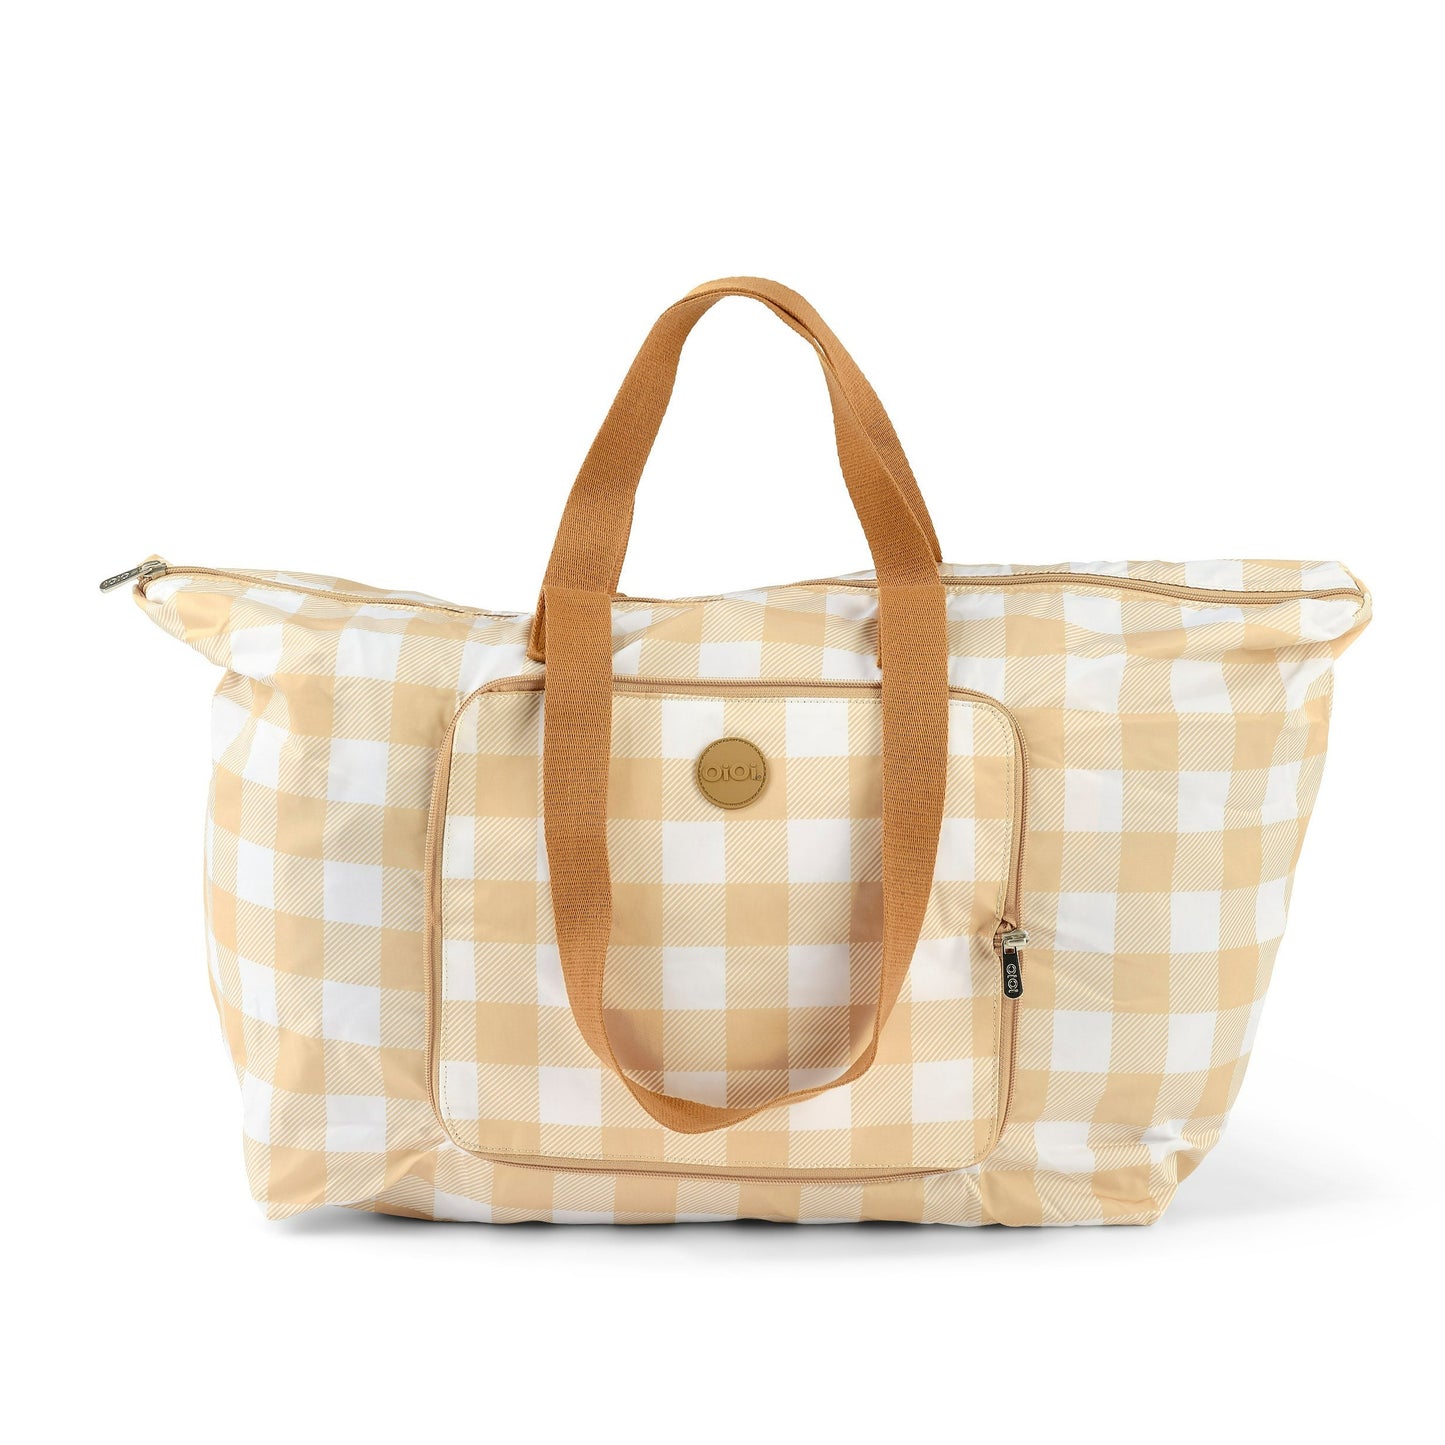 Fold-Up Shopping Tote - Beige Gingham